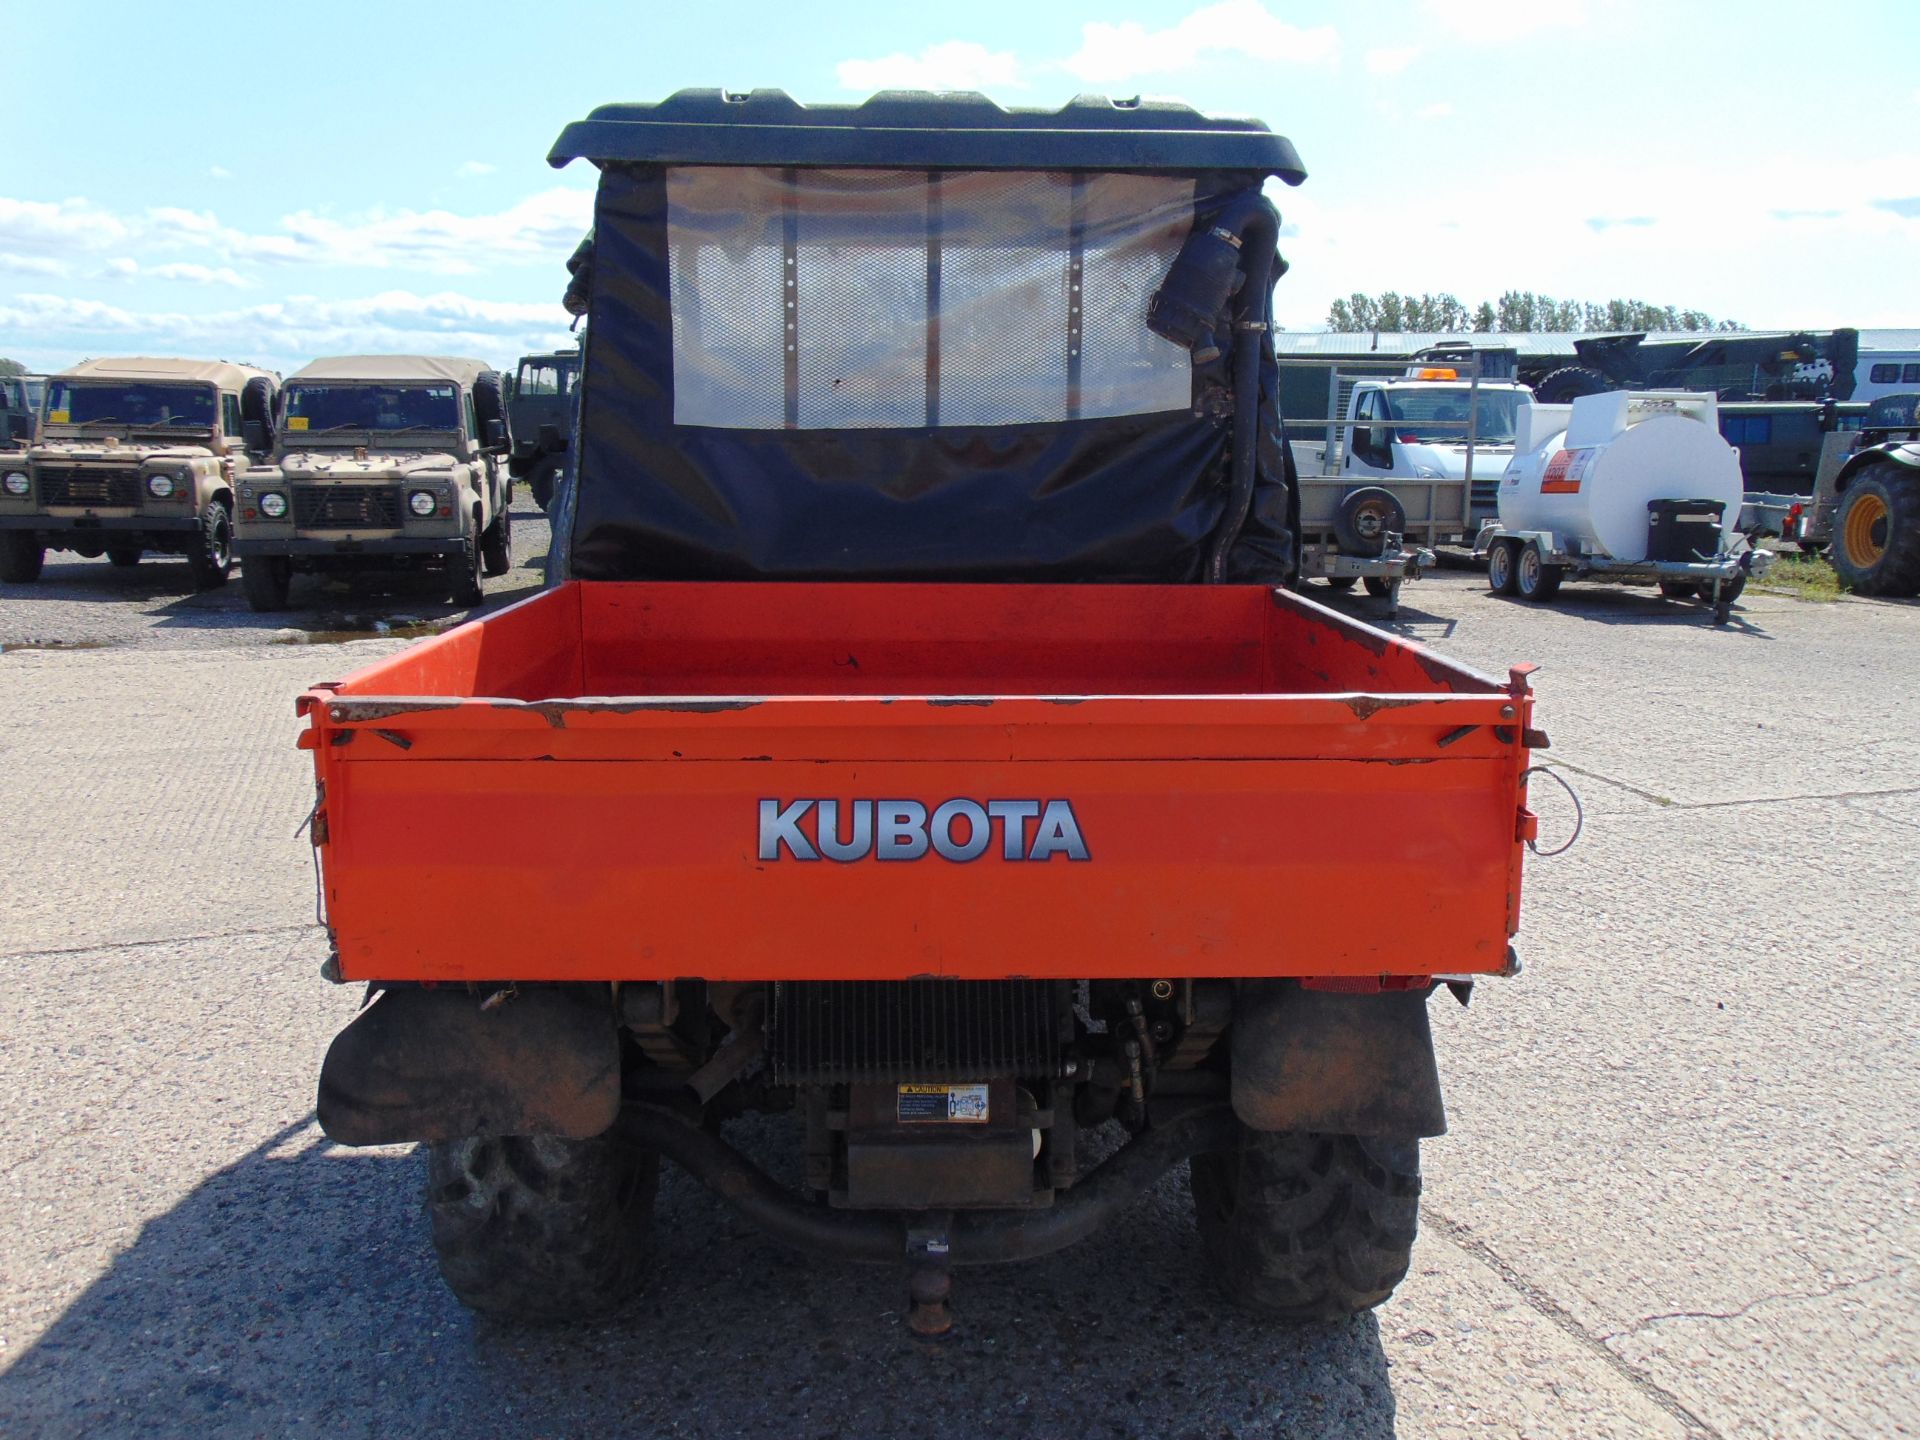 Kubota RTV900 4WD Utility ATV c/w Electric Hydraulic Rear Tipping Body ONLY 1128 HOURS! - Image 7 of 17